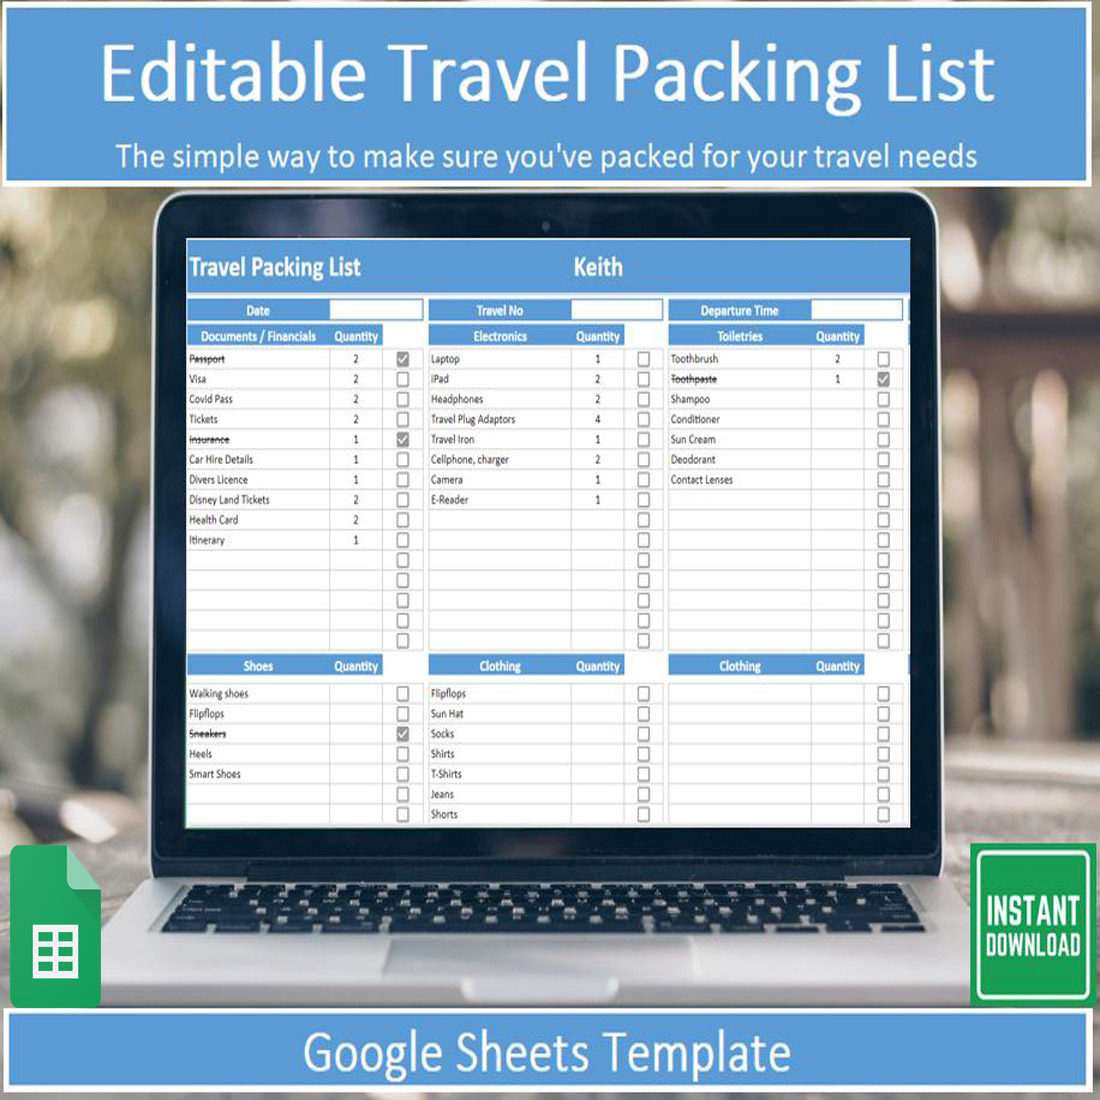 Editable Travel Packing List Template for Google Sheets cover image.